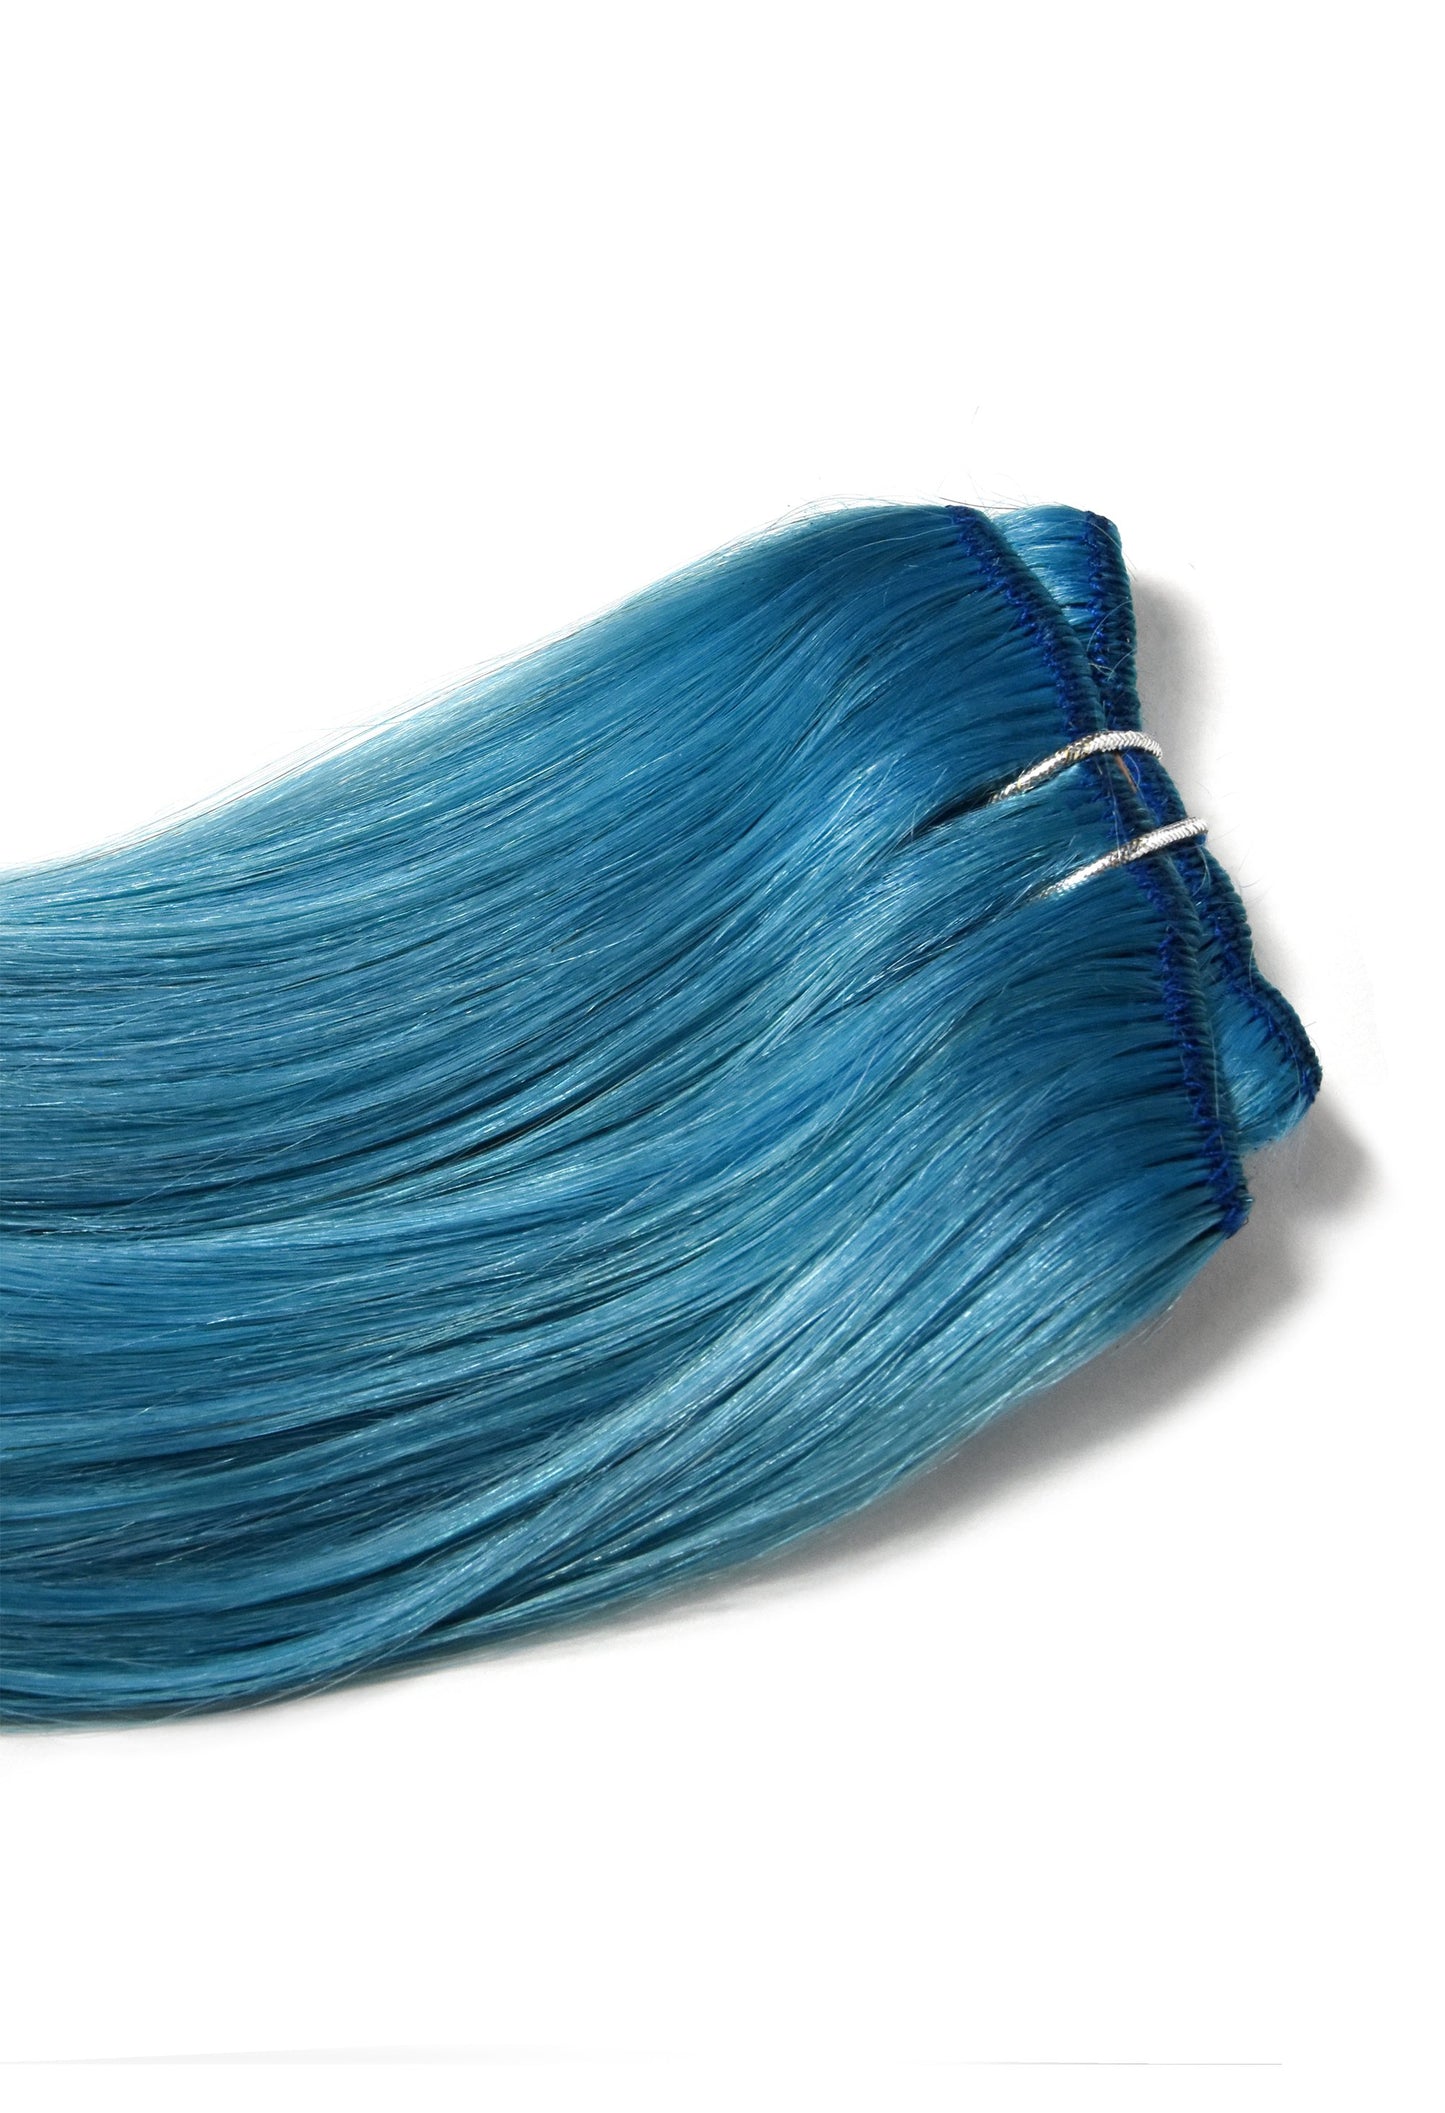 One Piece Top-up Remy Clip in Human Hair Extensions - Turquoise